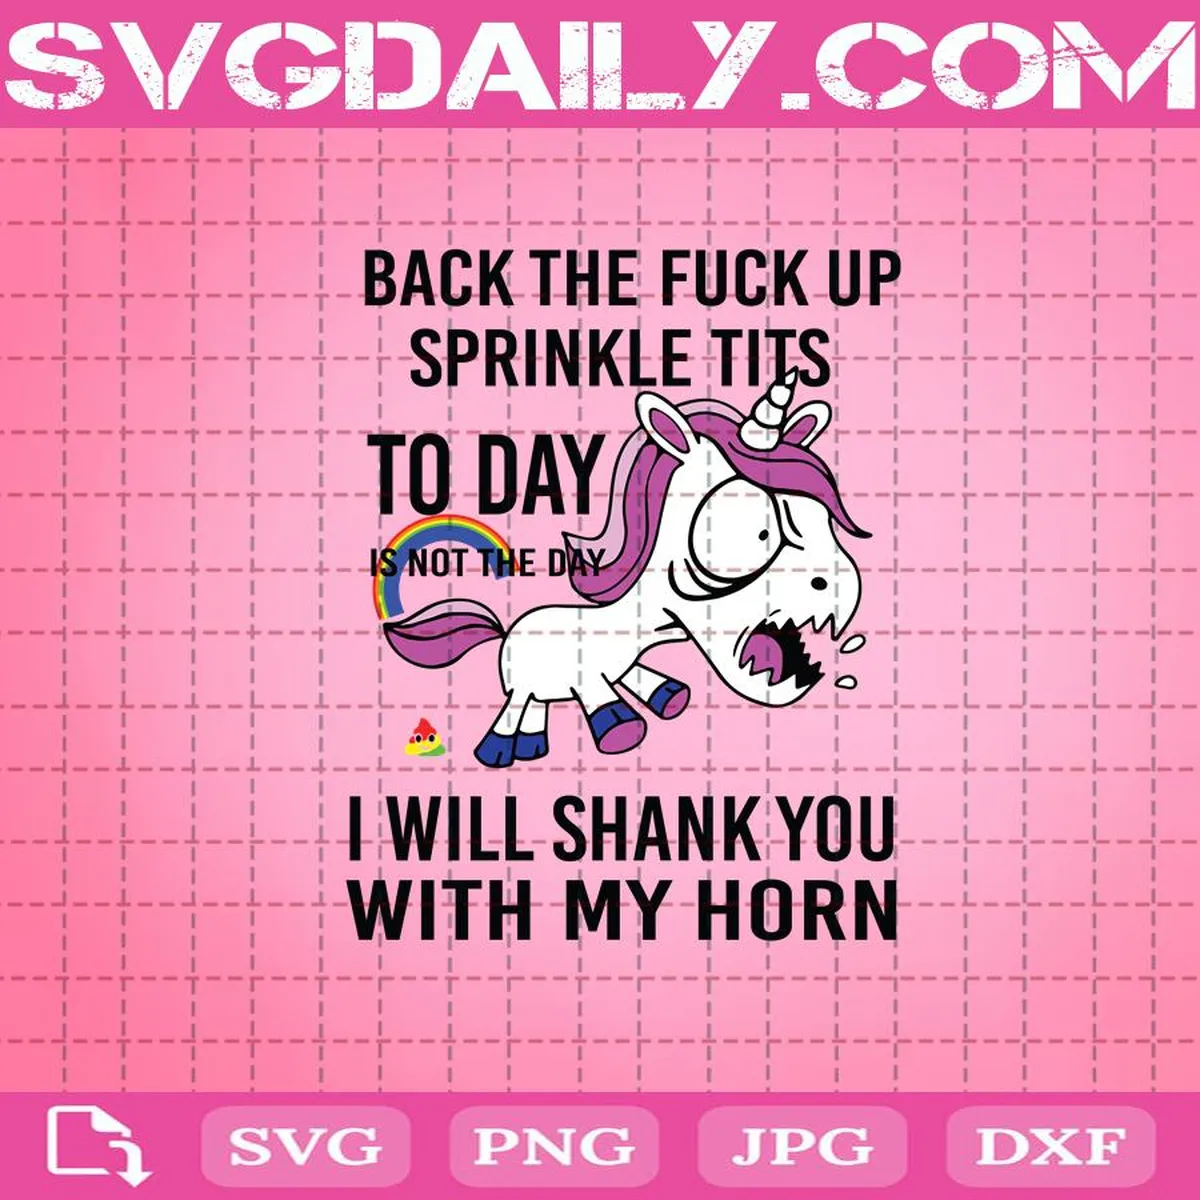 Back The Fuck Up Sprinkle Tits Today Is Not The Day I Will Shank You With My Horn Svg, Unicorn Svg, Funny Unicorn Svg